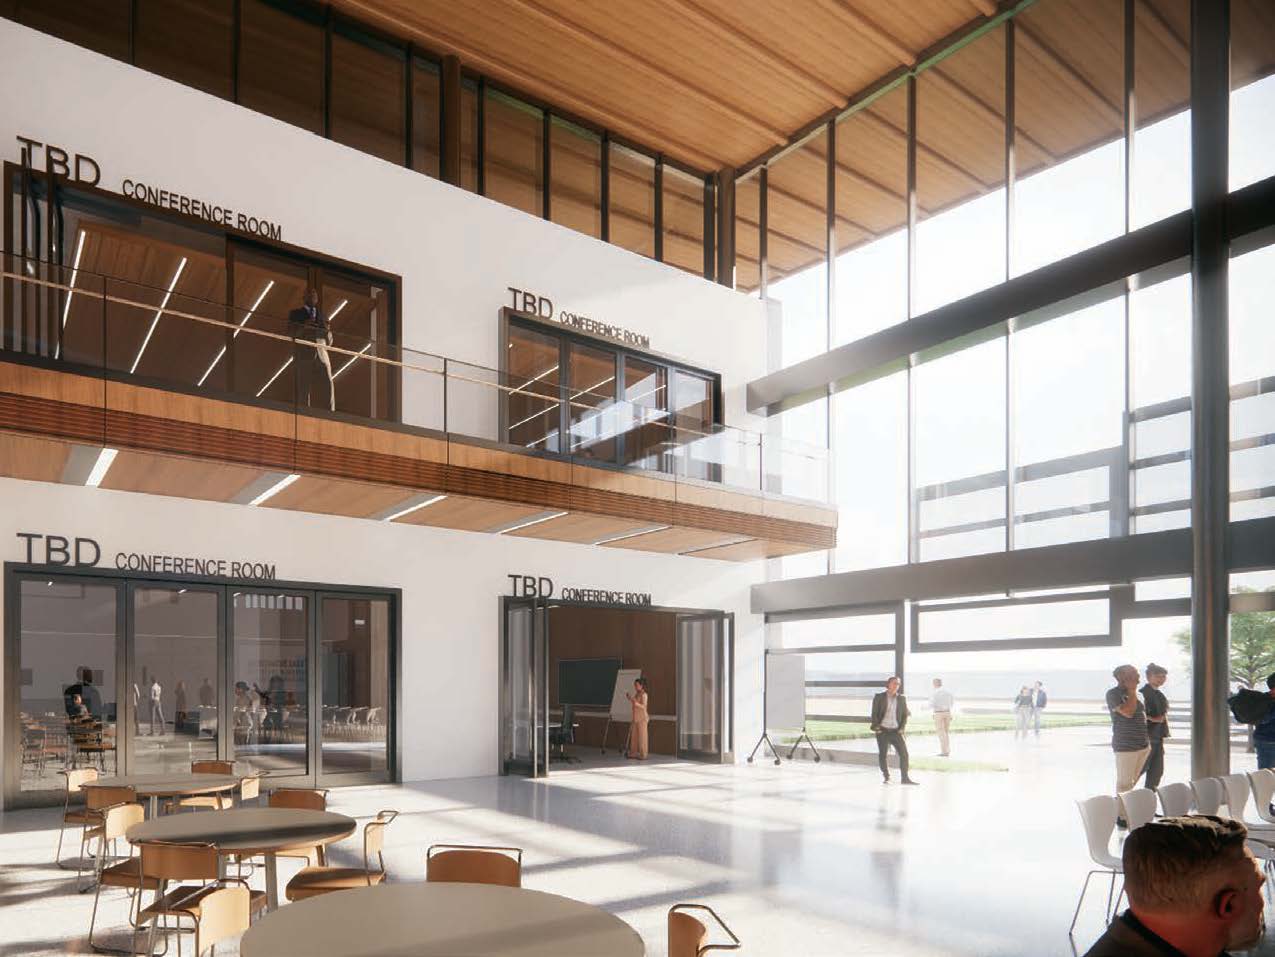 Rendering of interior space - Open interior spaces
provide areas for
collaboration.